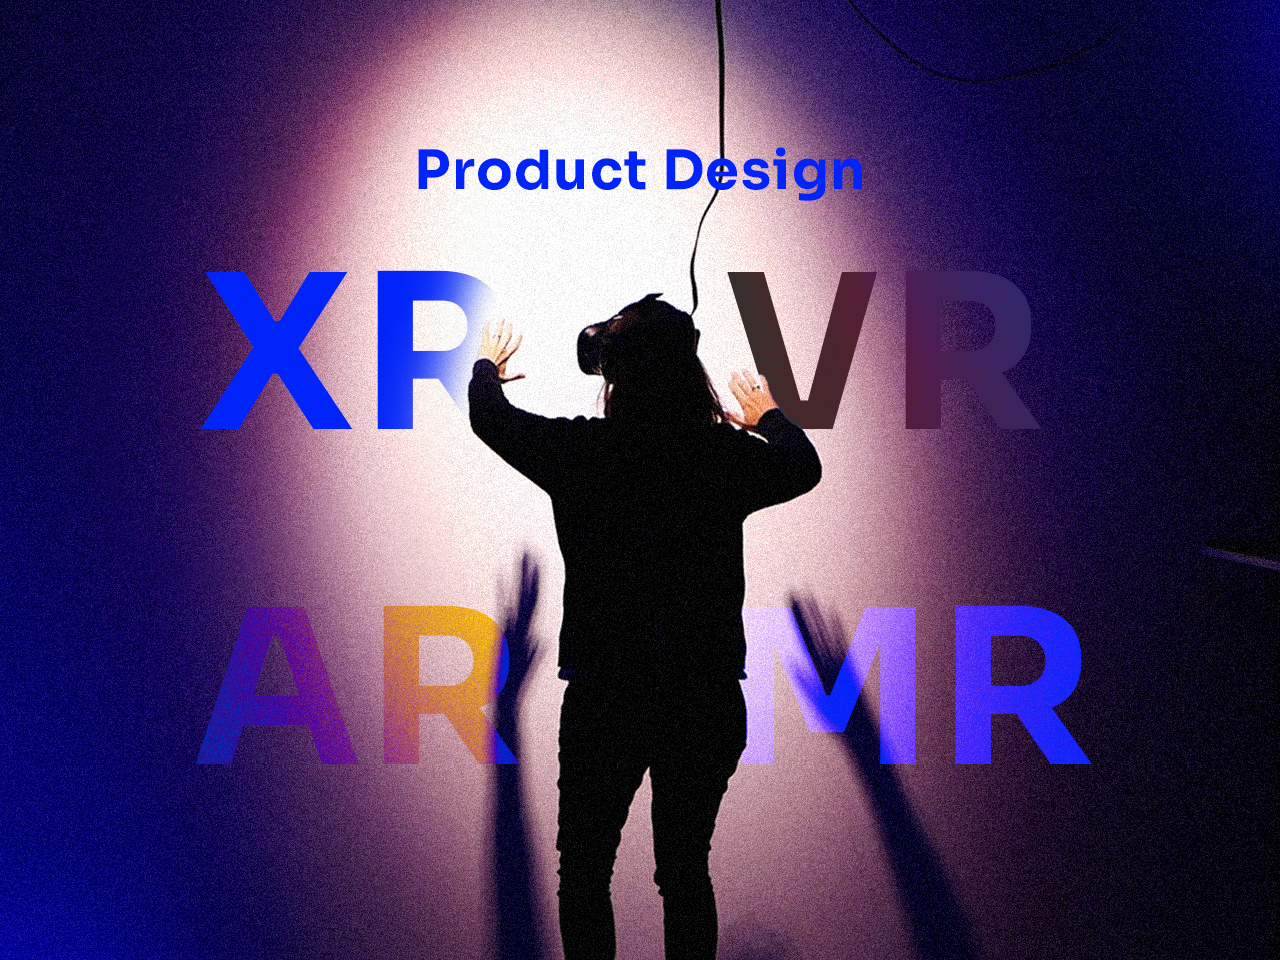 Virtual reality product design